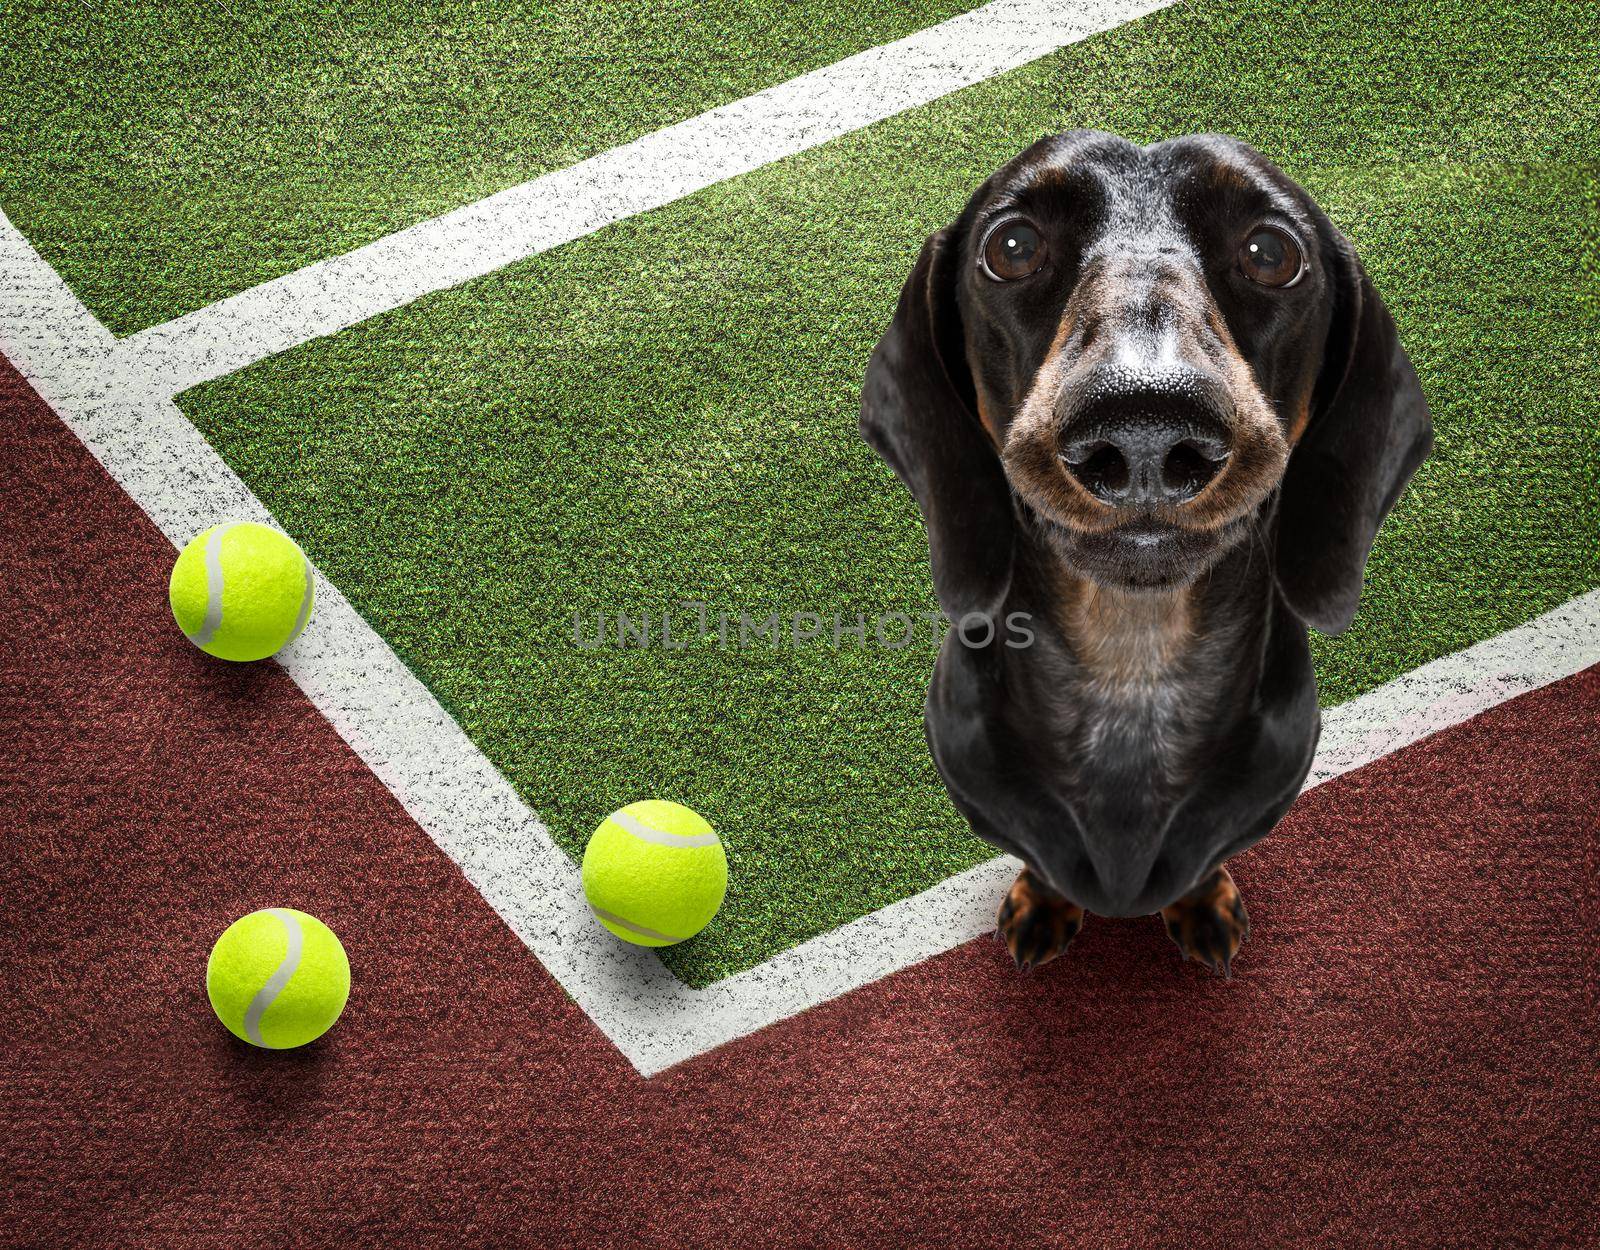 player sporty dachshund dog on tennis field court with balls, ready for a play or game